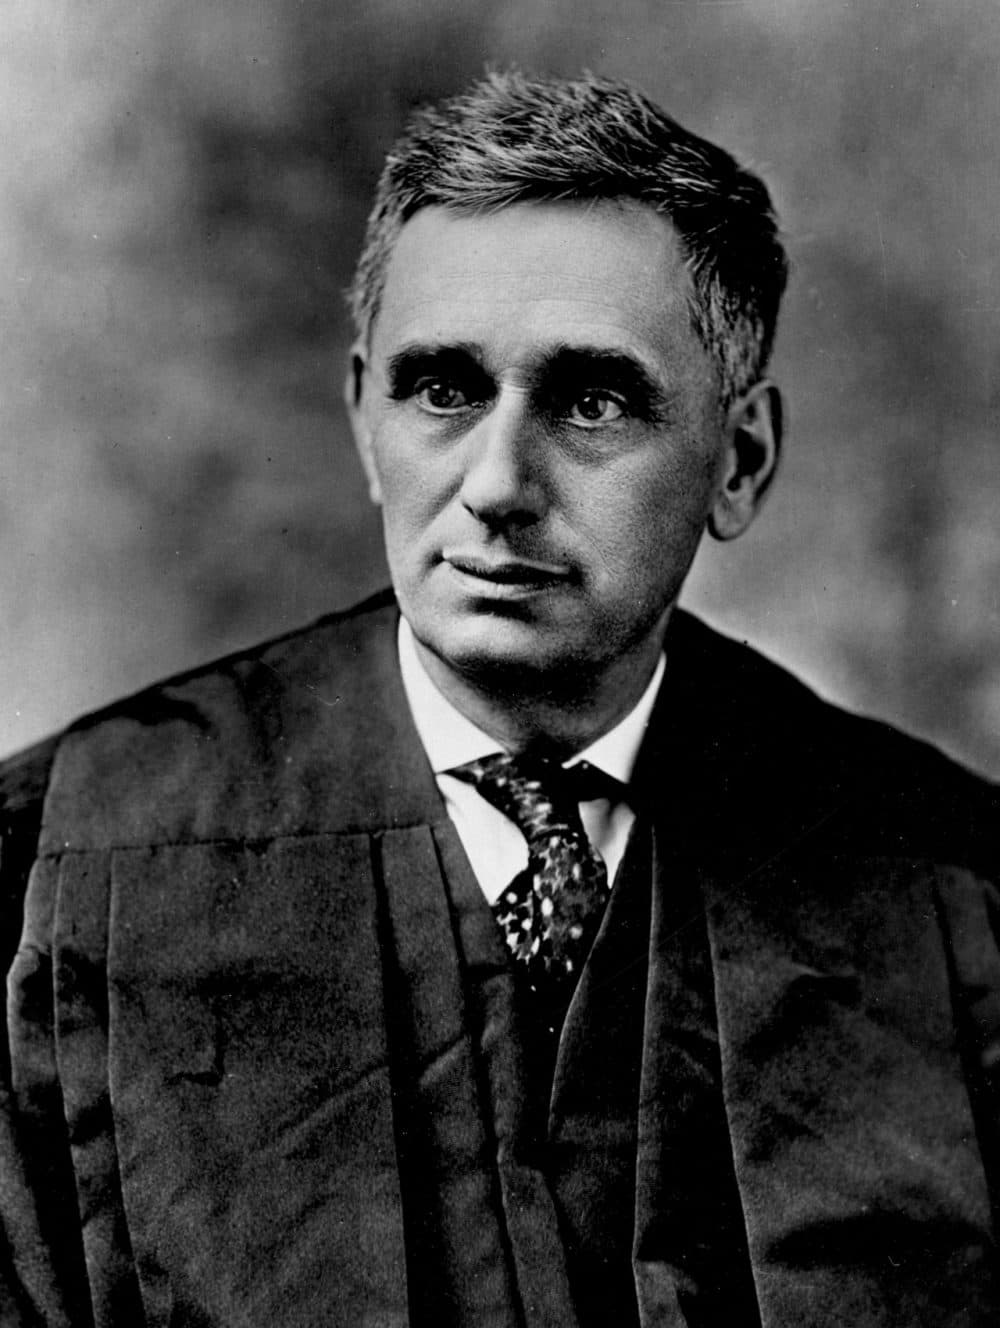 U.S. Supreme Court Justice Louis D. Brandeis served as an associate justice of the Supreme Court from 1916 to 1939. (AP Photo)